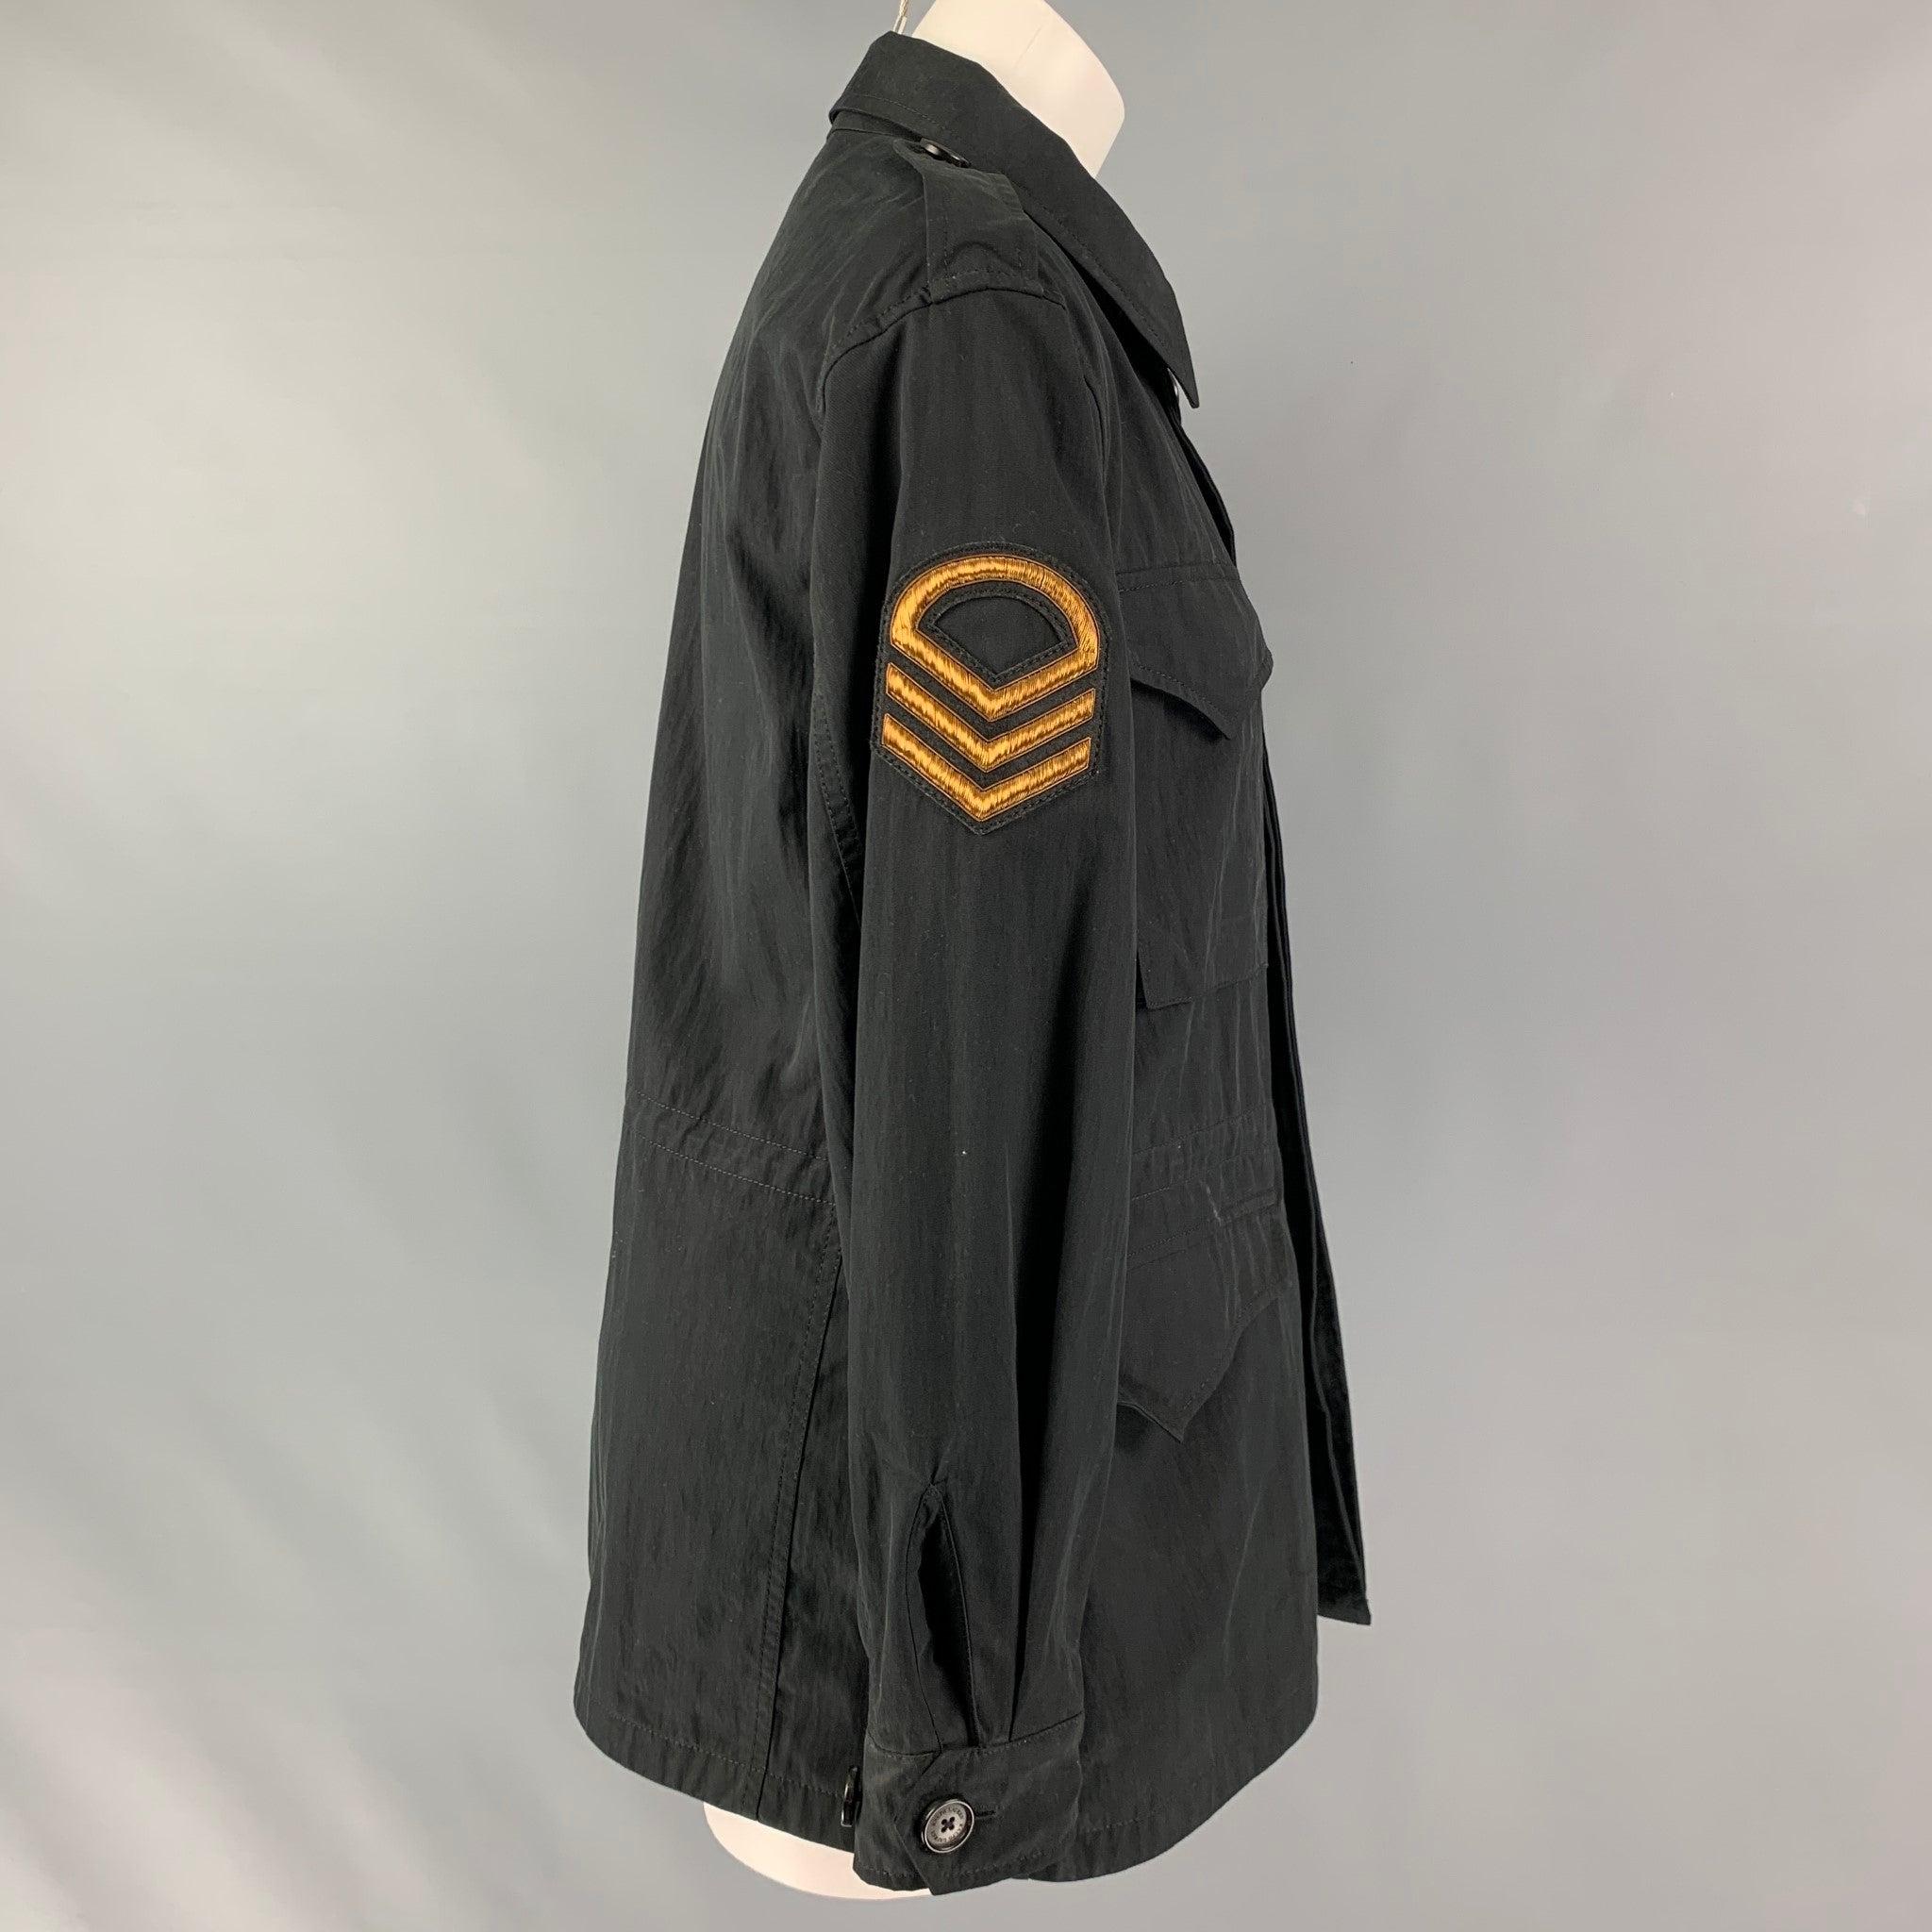 RALPH LAUREN COLLECTION by jacket comes in a black twill cotton blend featuring a gold patch details, military style, drawstring at waist, and a hidden button closure. Made in Italy.Good Pre-Owned Condition. Moderate fading Marks. AS IS
  

Marked: 